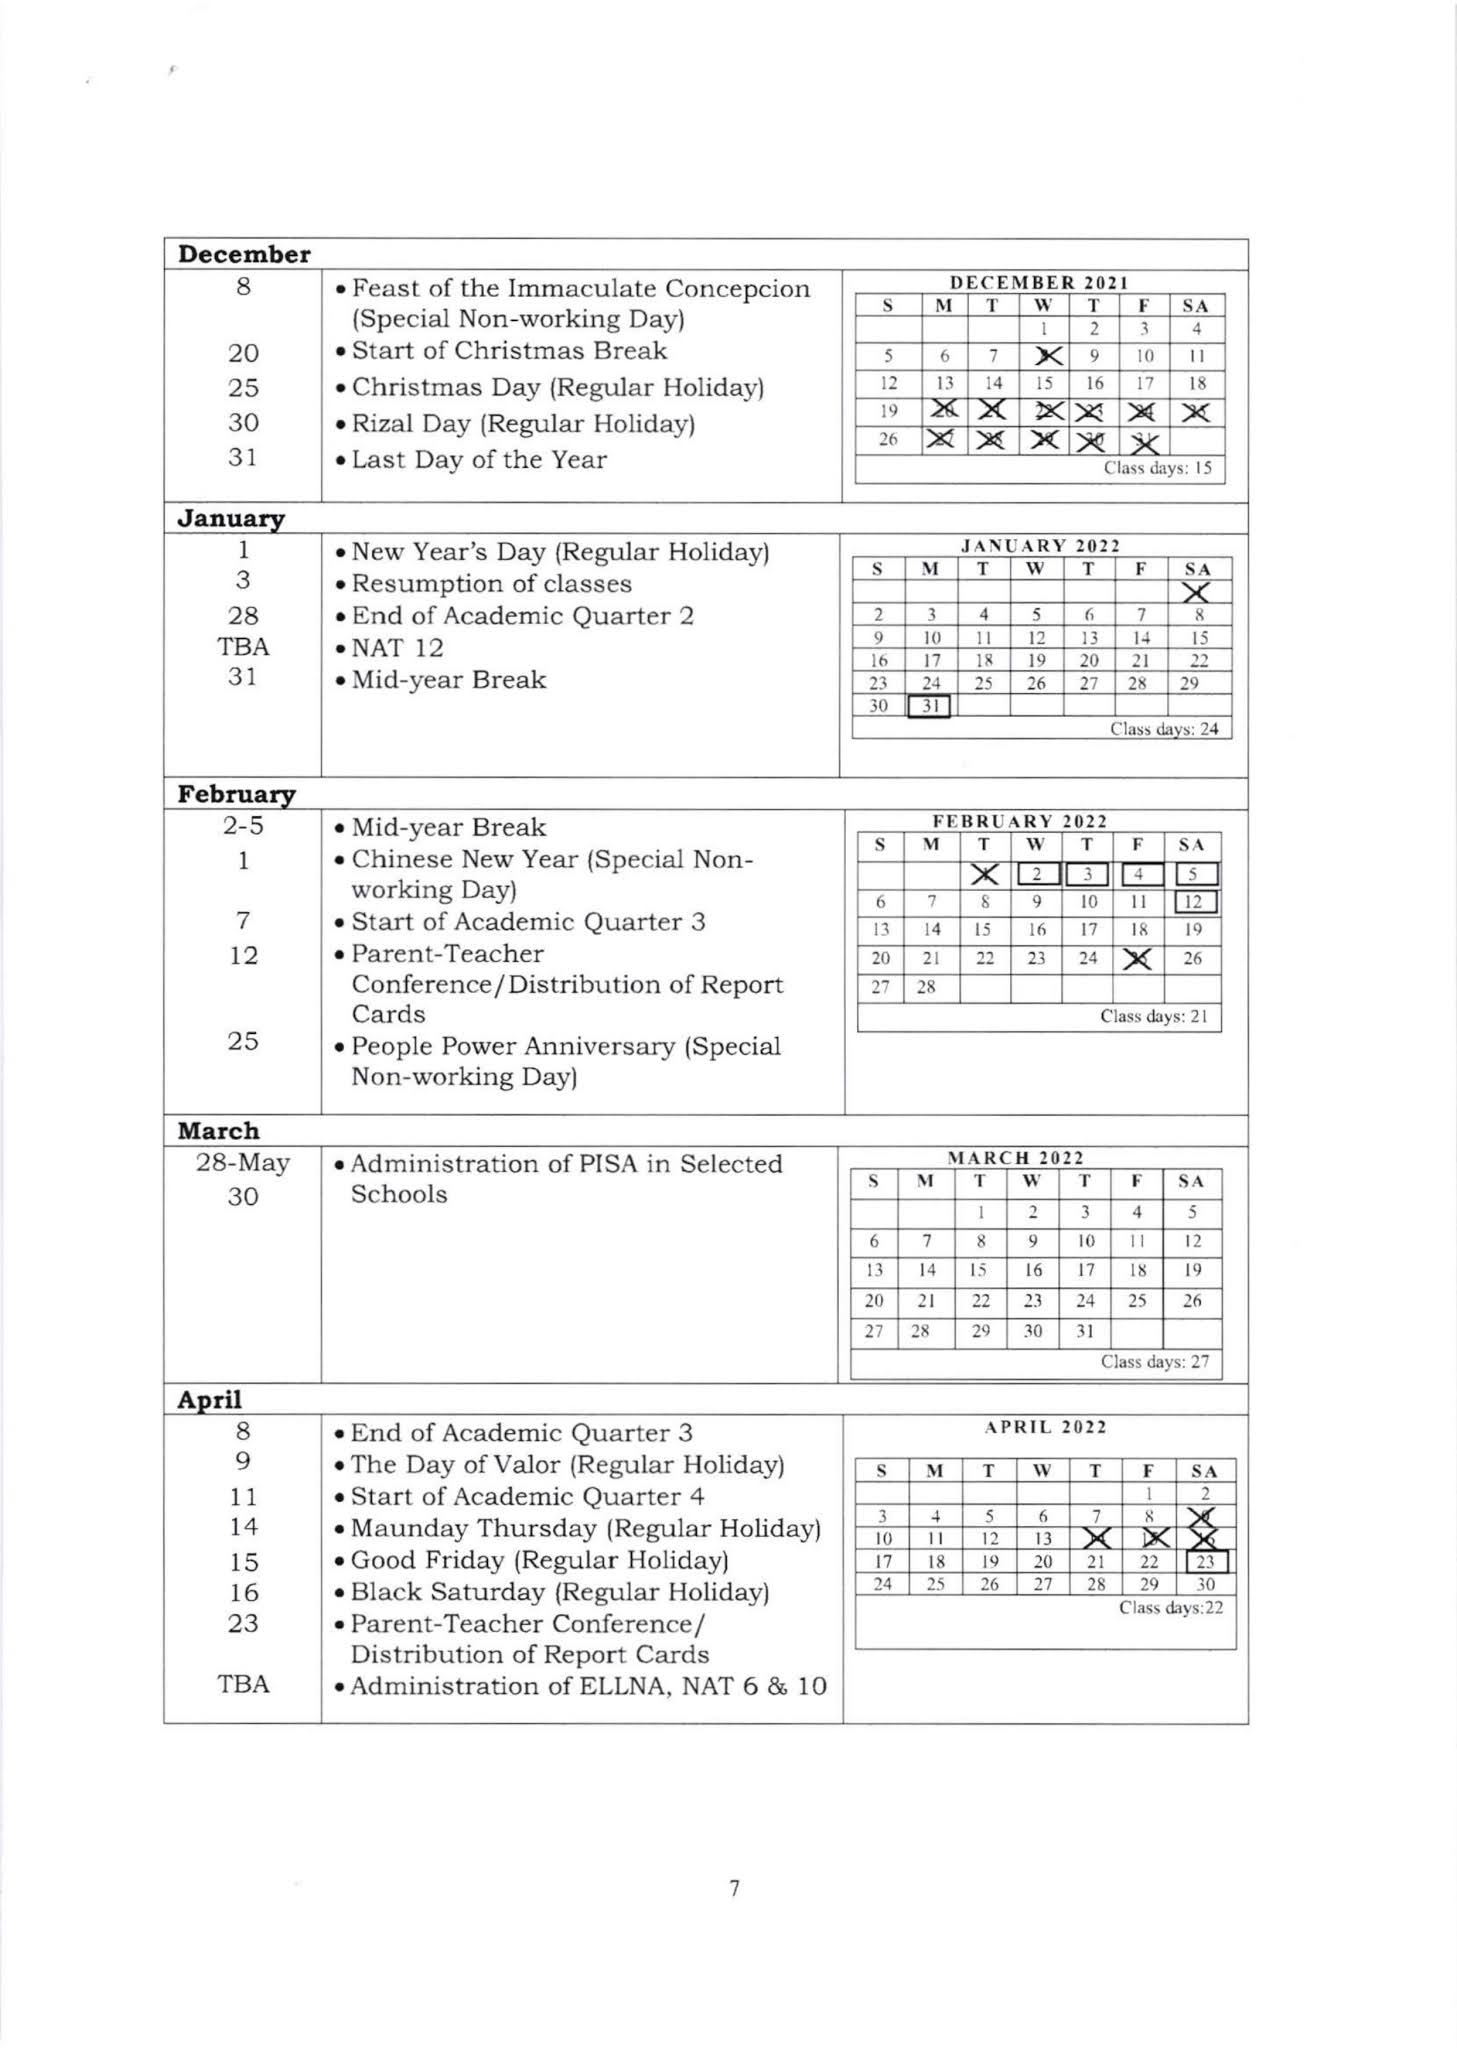 deped-s-proposed-school-calendar-for-school-year-2022-2023-beyond-the